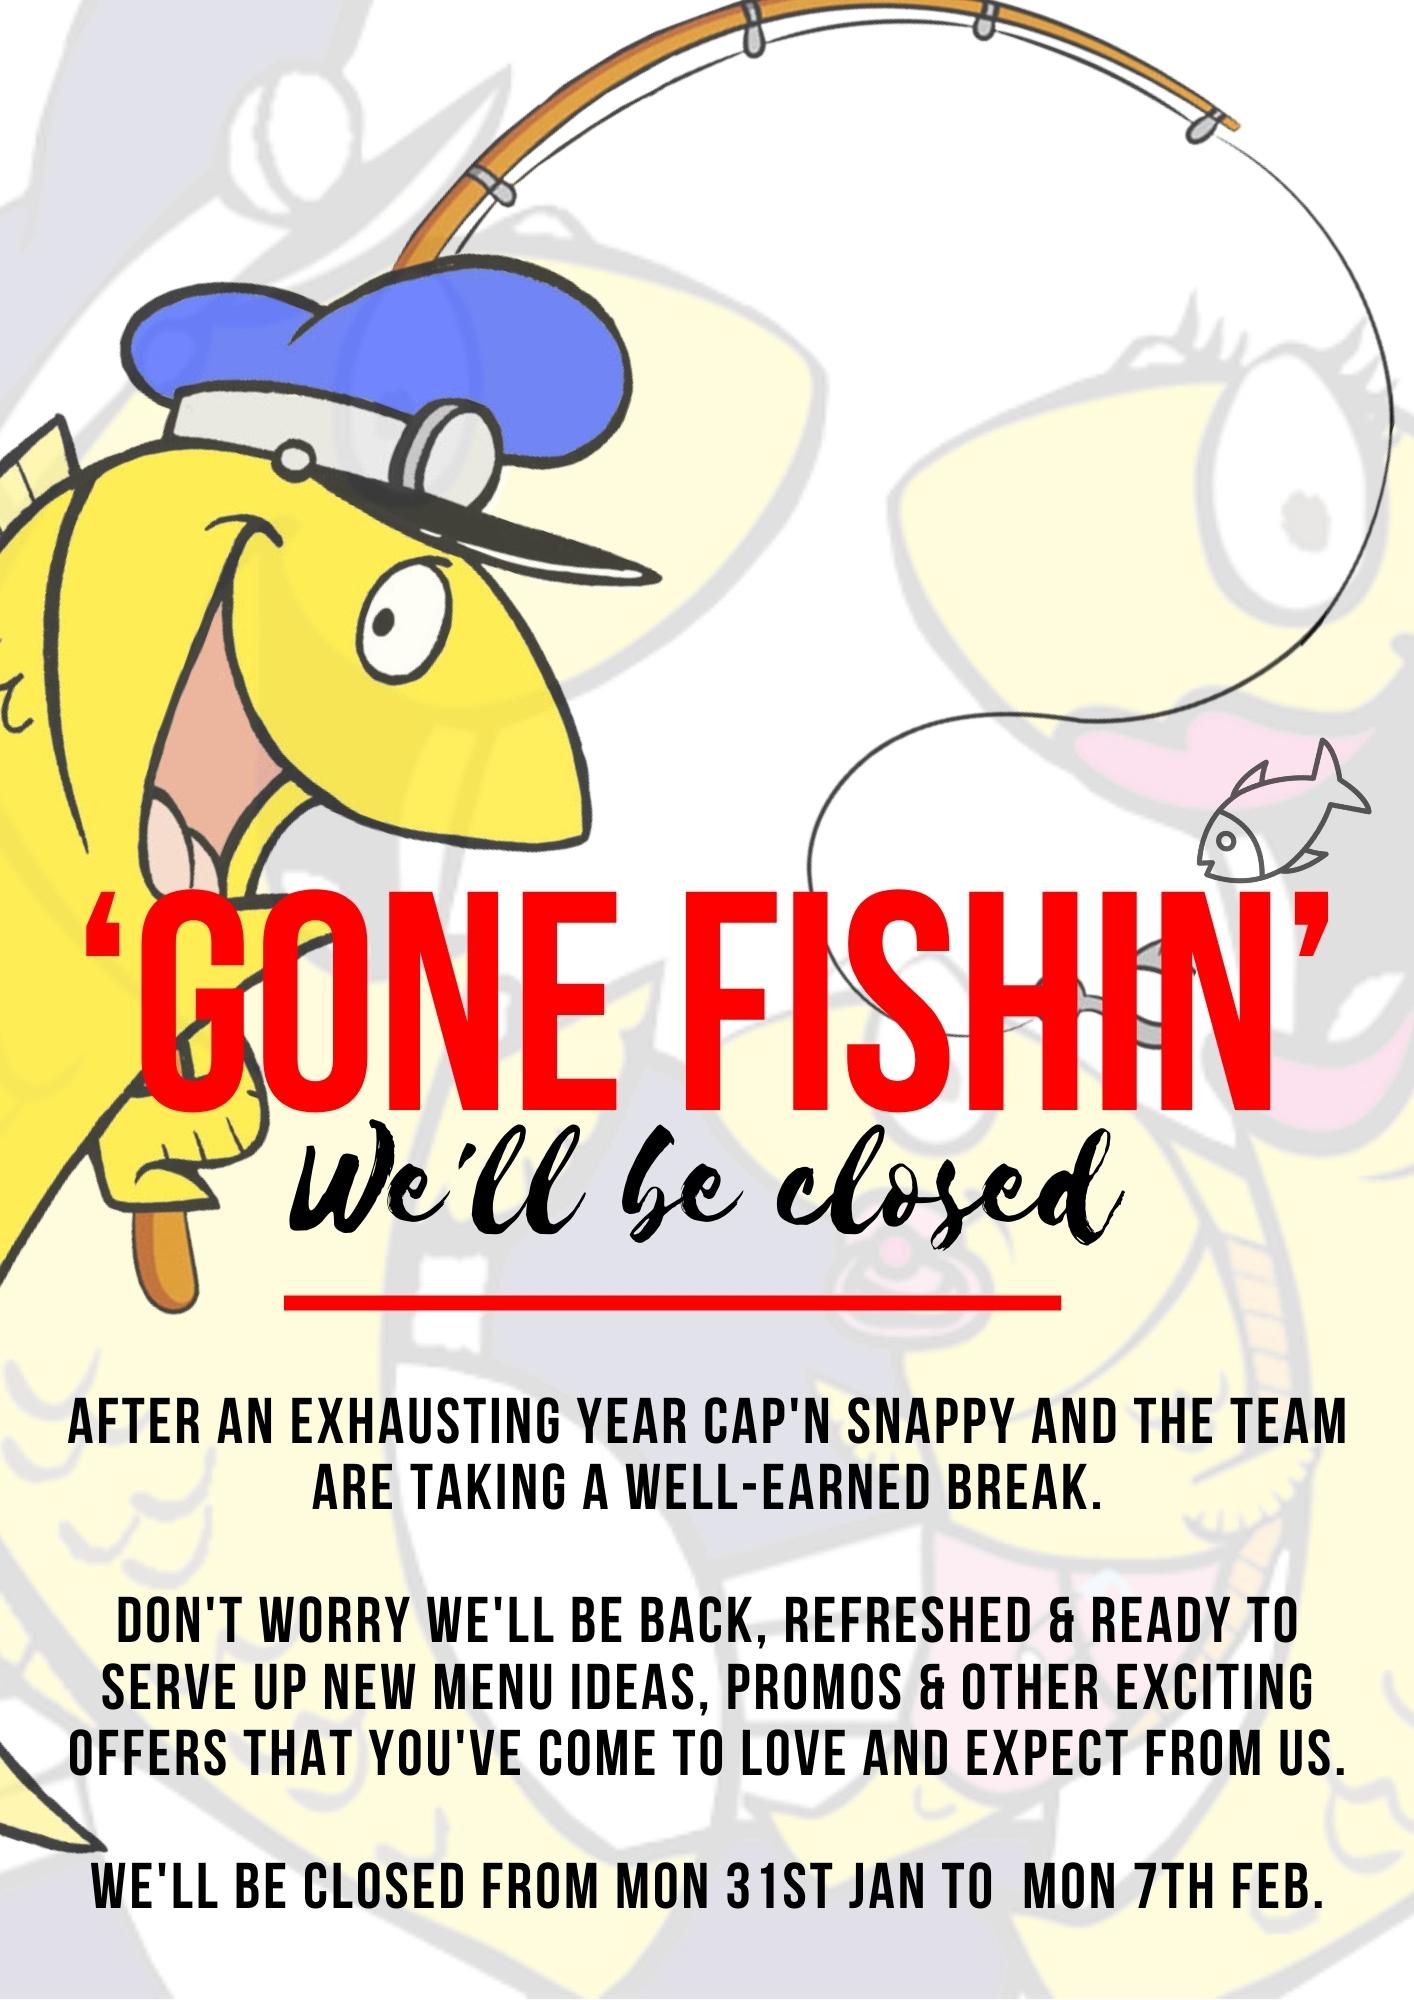 We've gone fishin' - closed from 31st Jan to 7th Feb 1